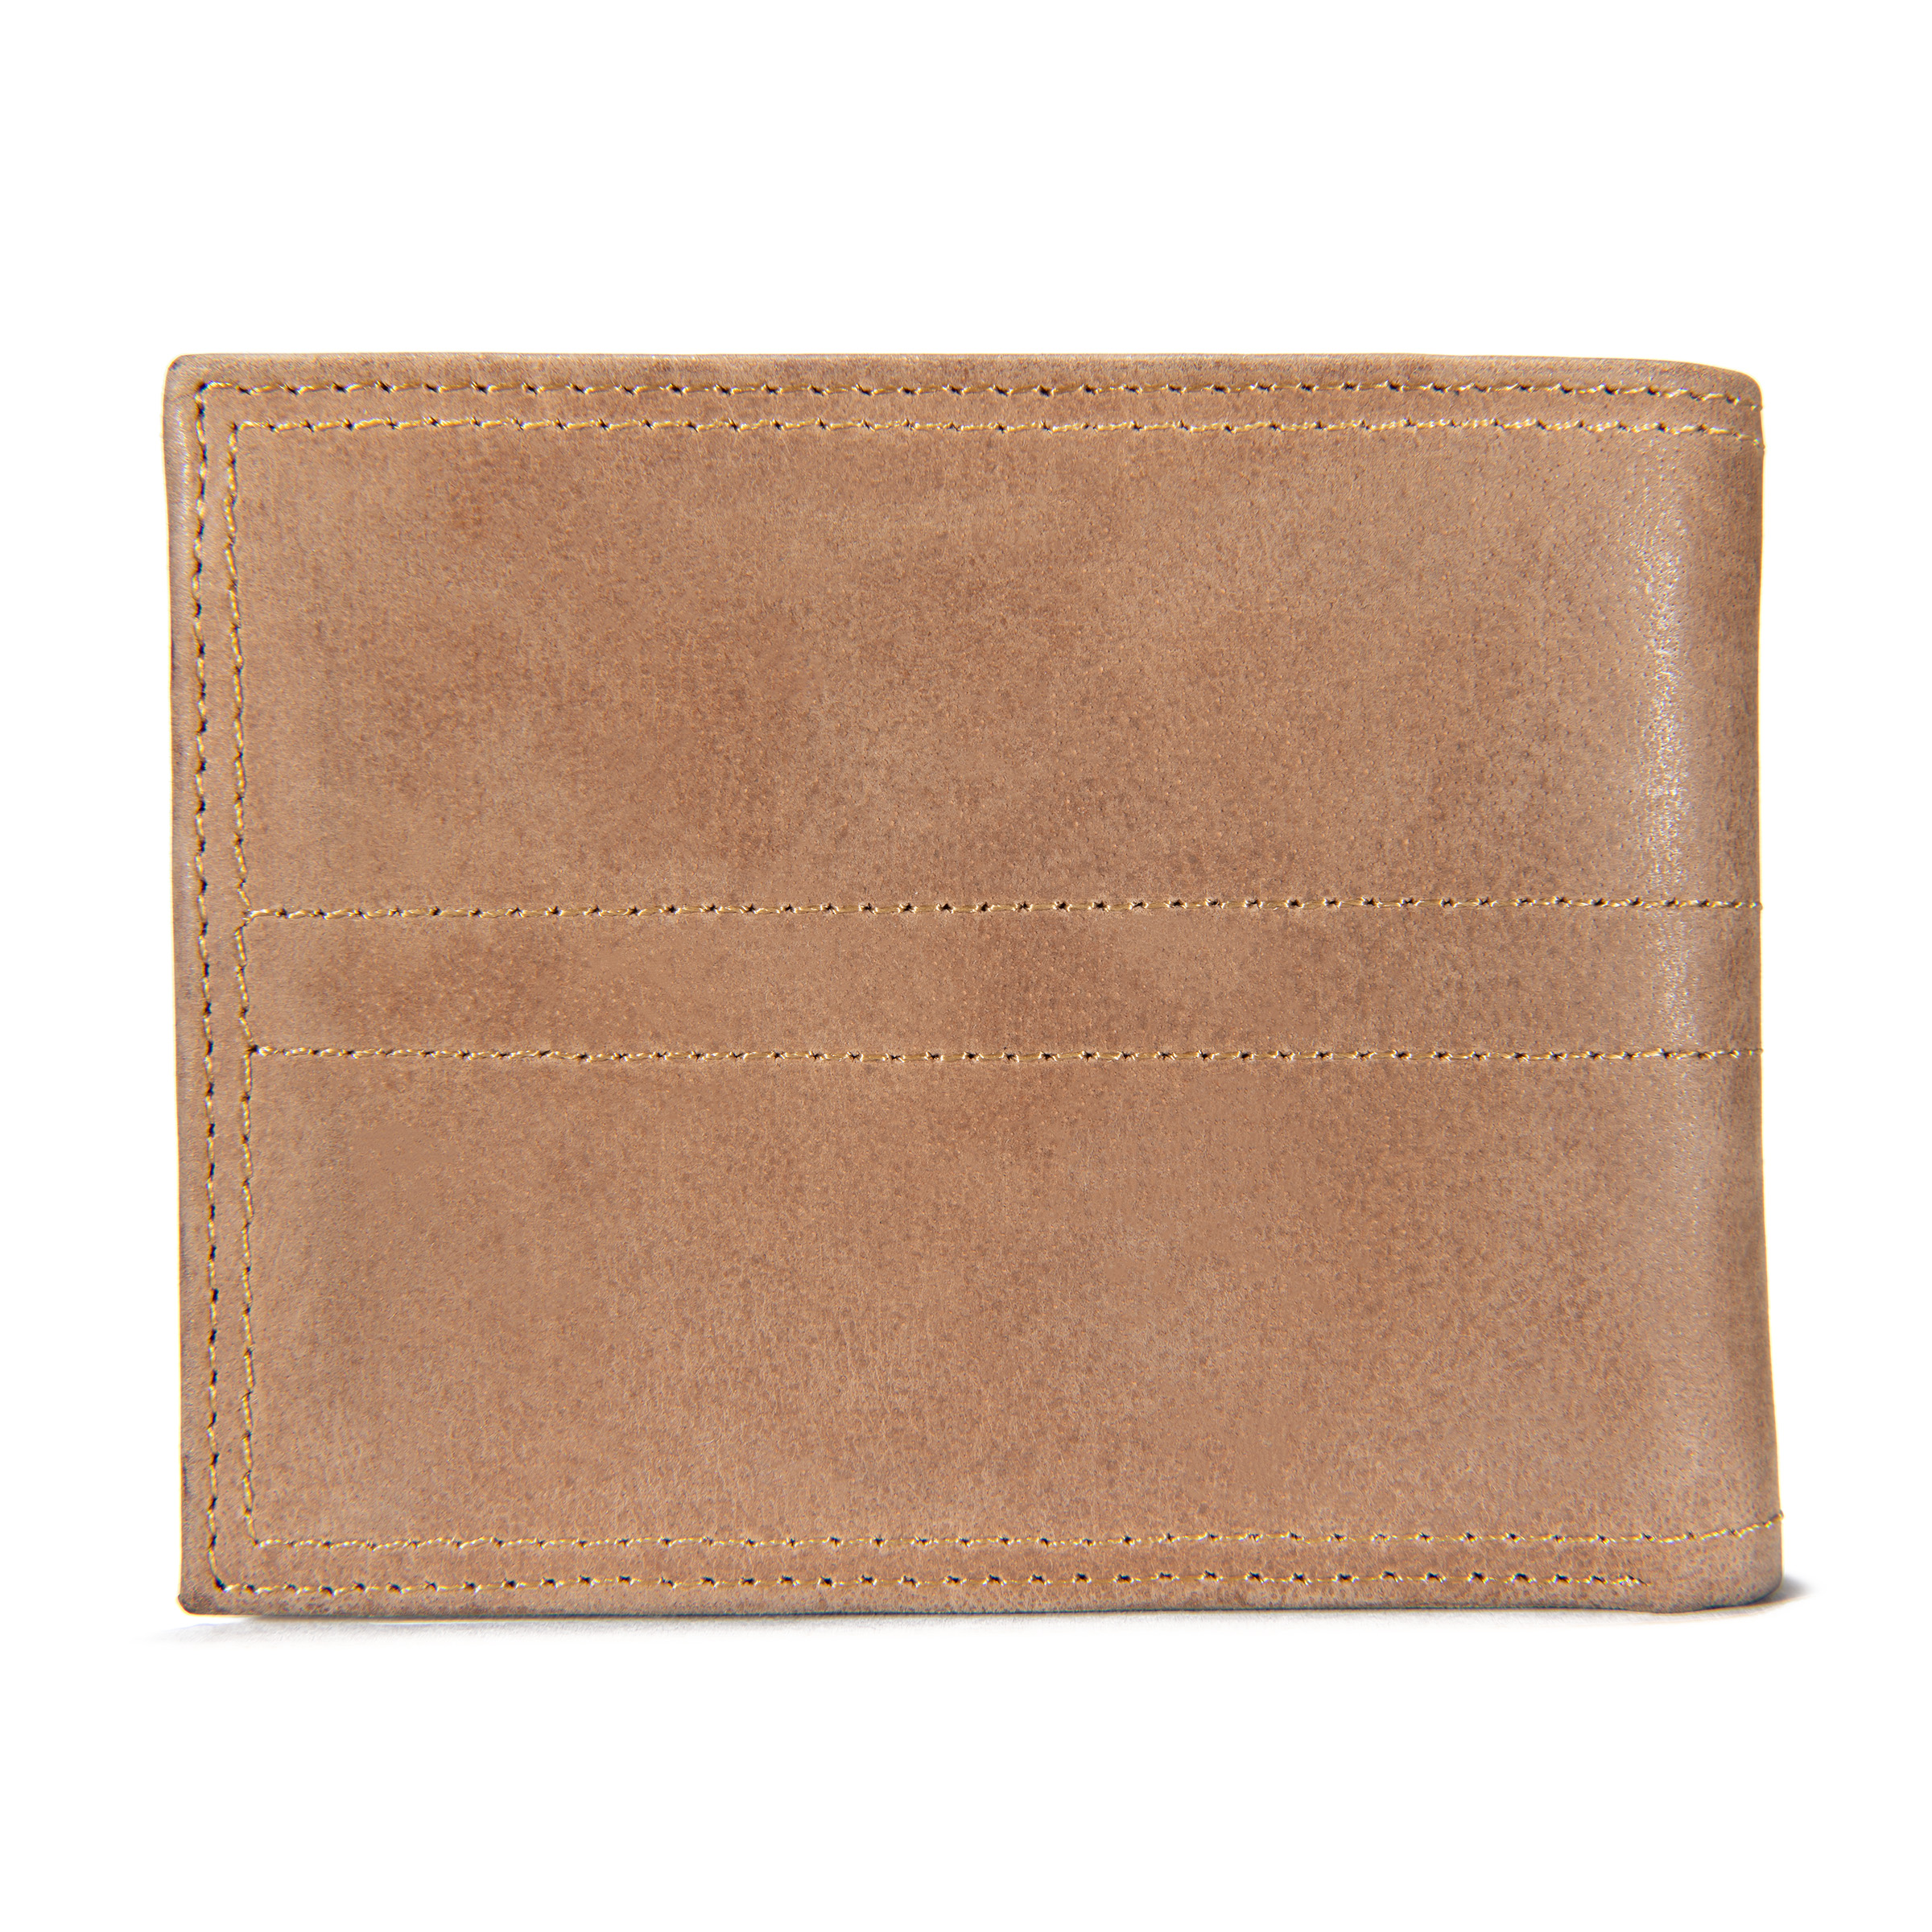 Picture of Carhartt B0000207 Mens Saddle Leather Bifold Wallet